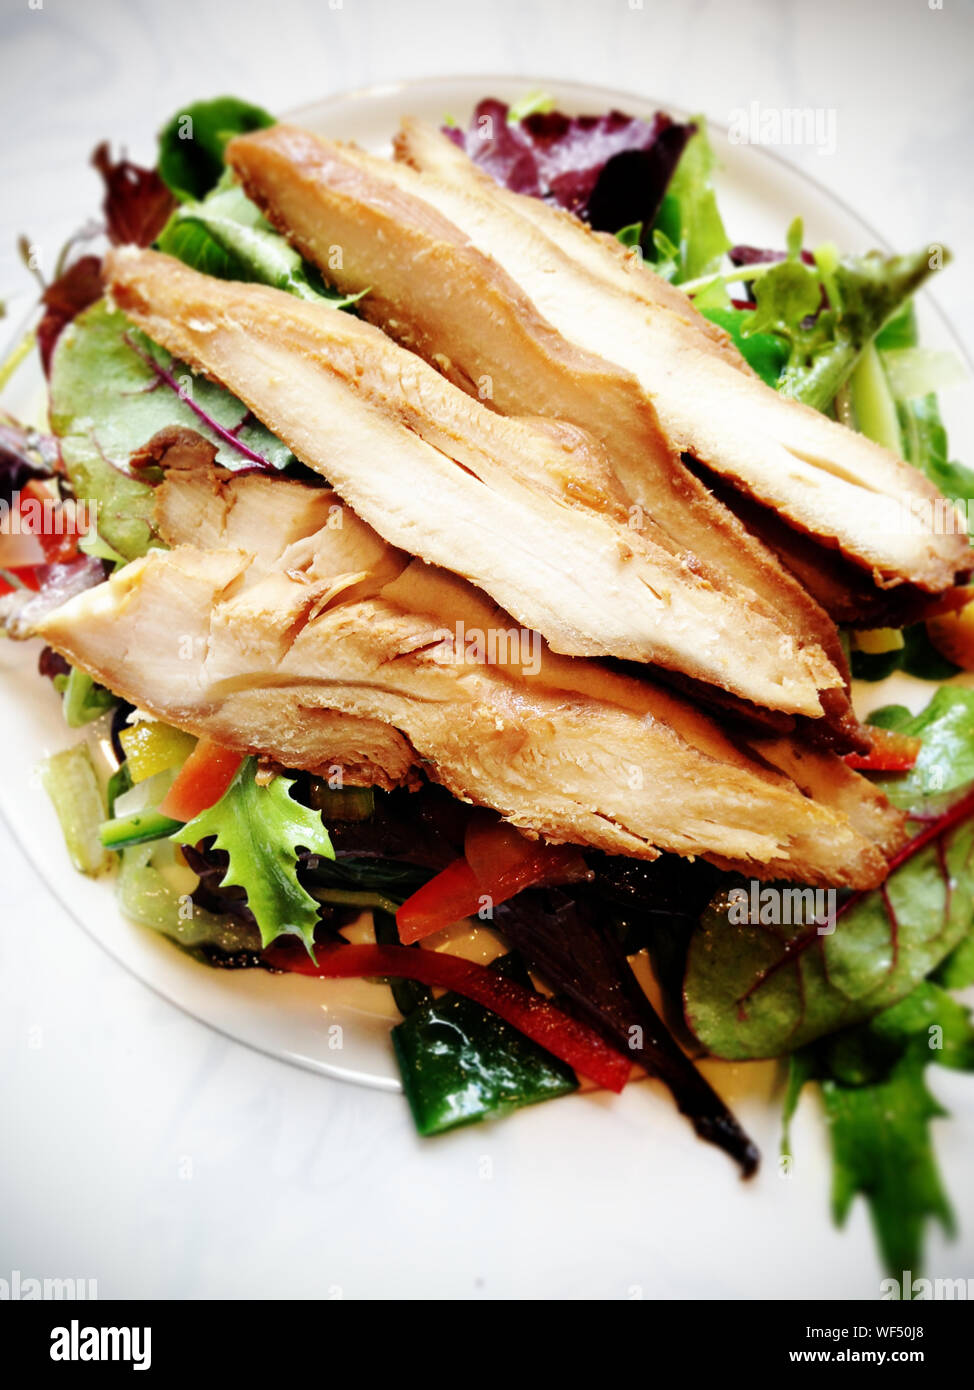 Close-up View Of Salads With Meat Slices Stock Photo